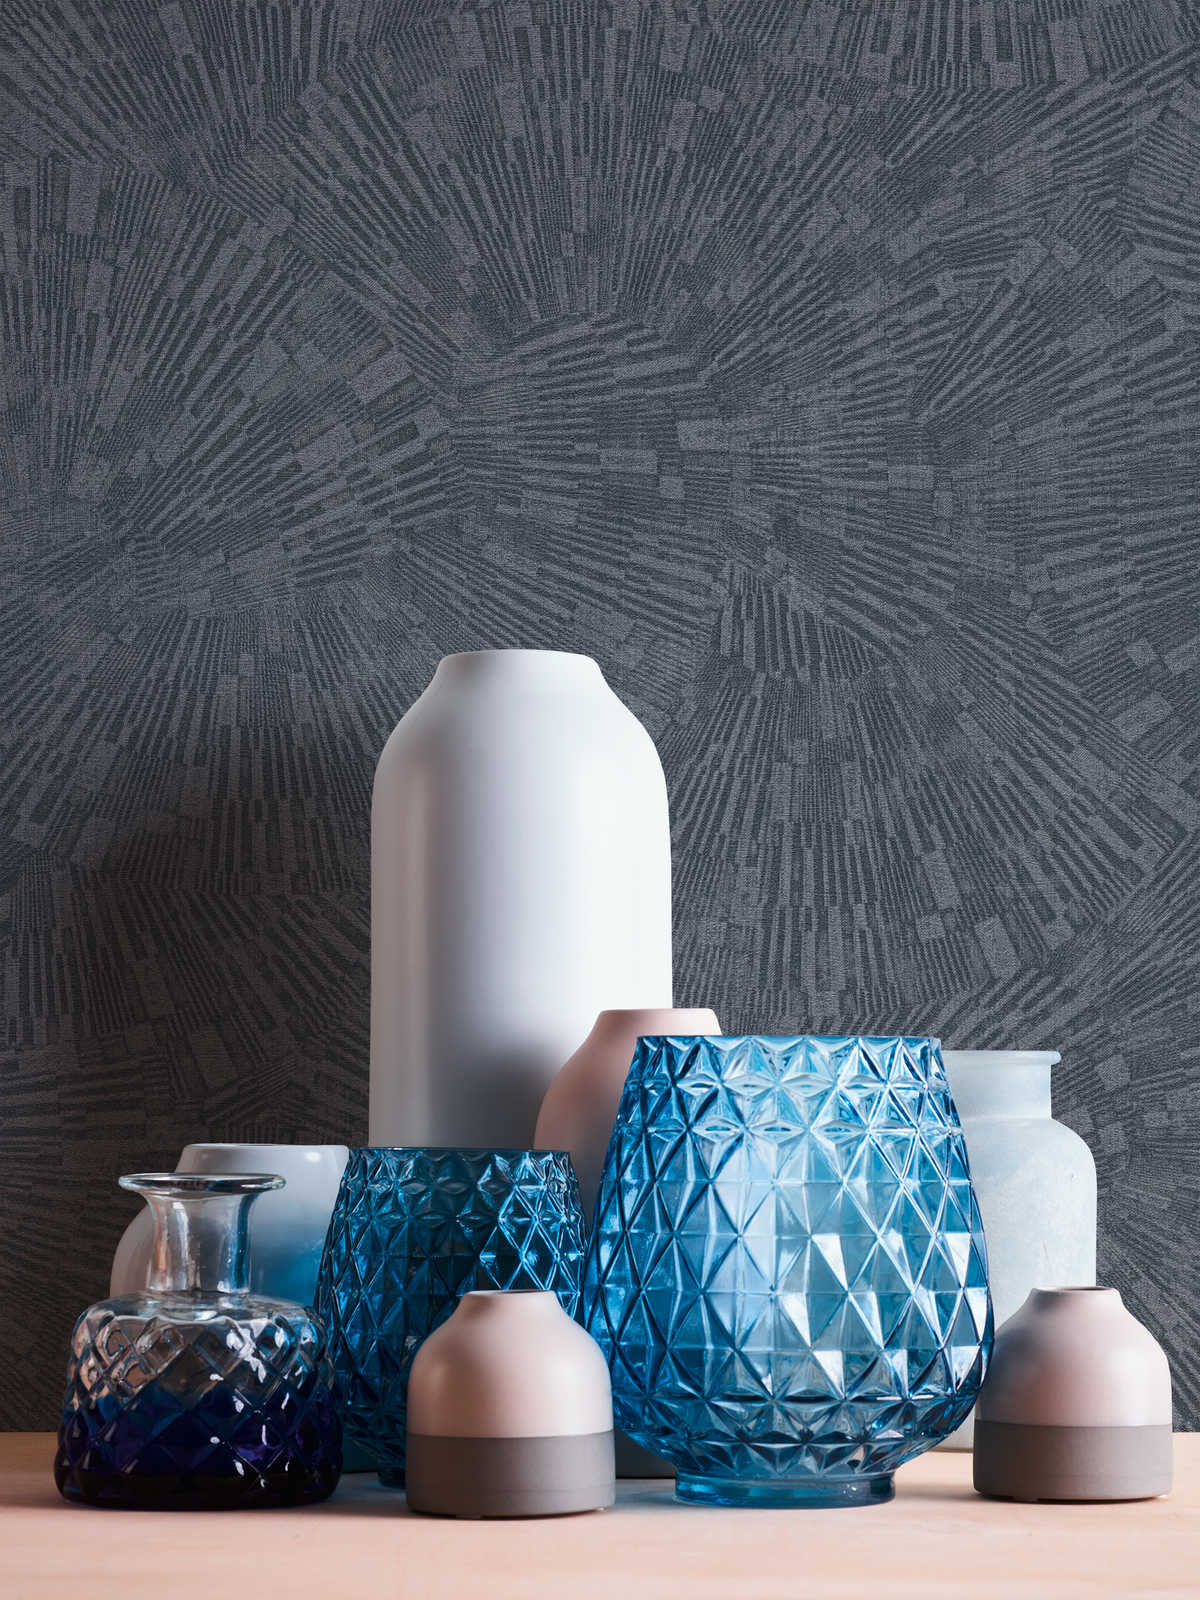             Plain wallpaper with graphic pattern & gloss effect - Blue
        